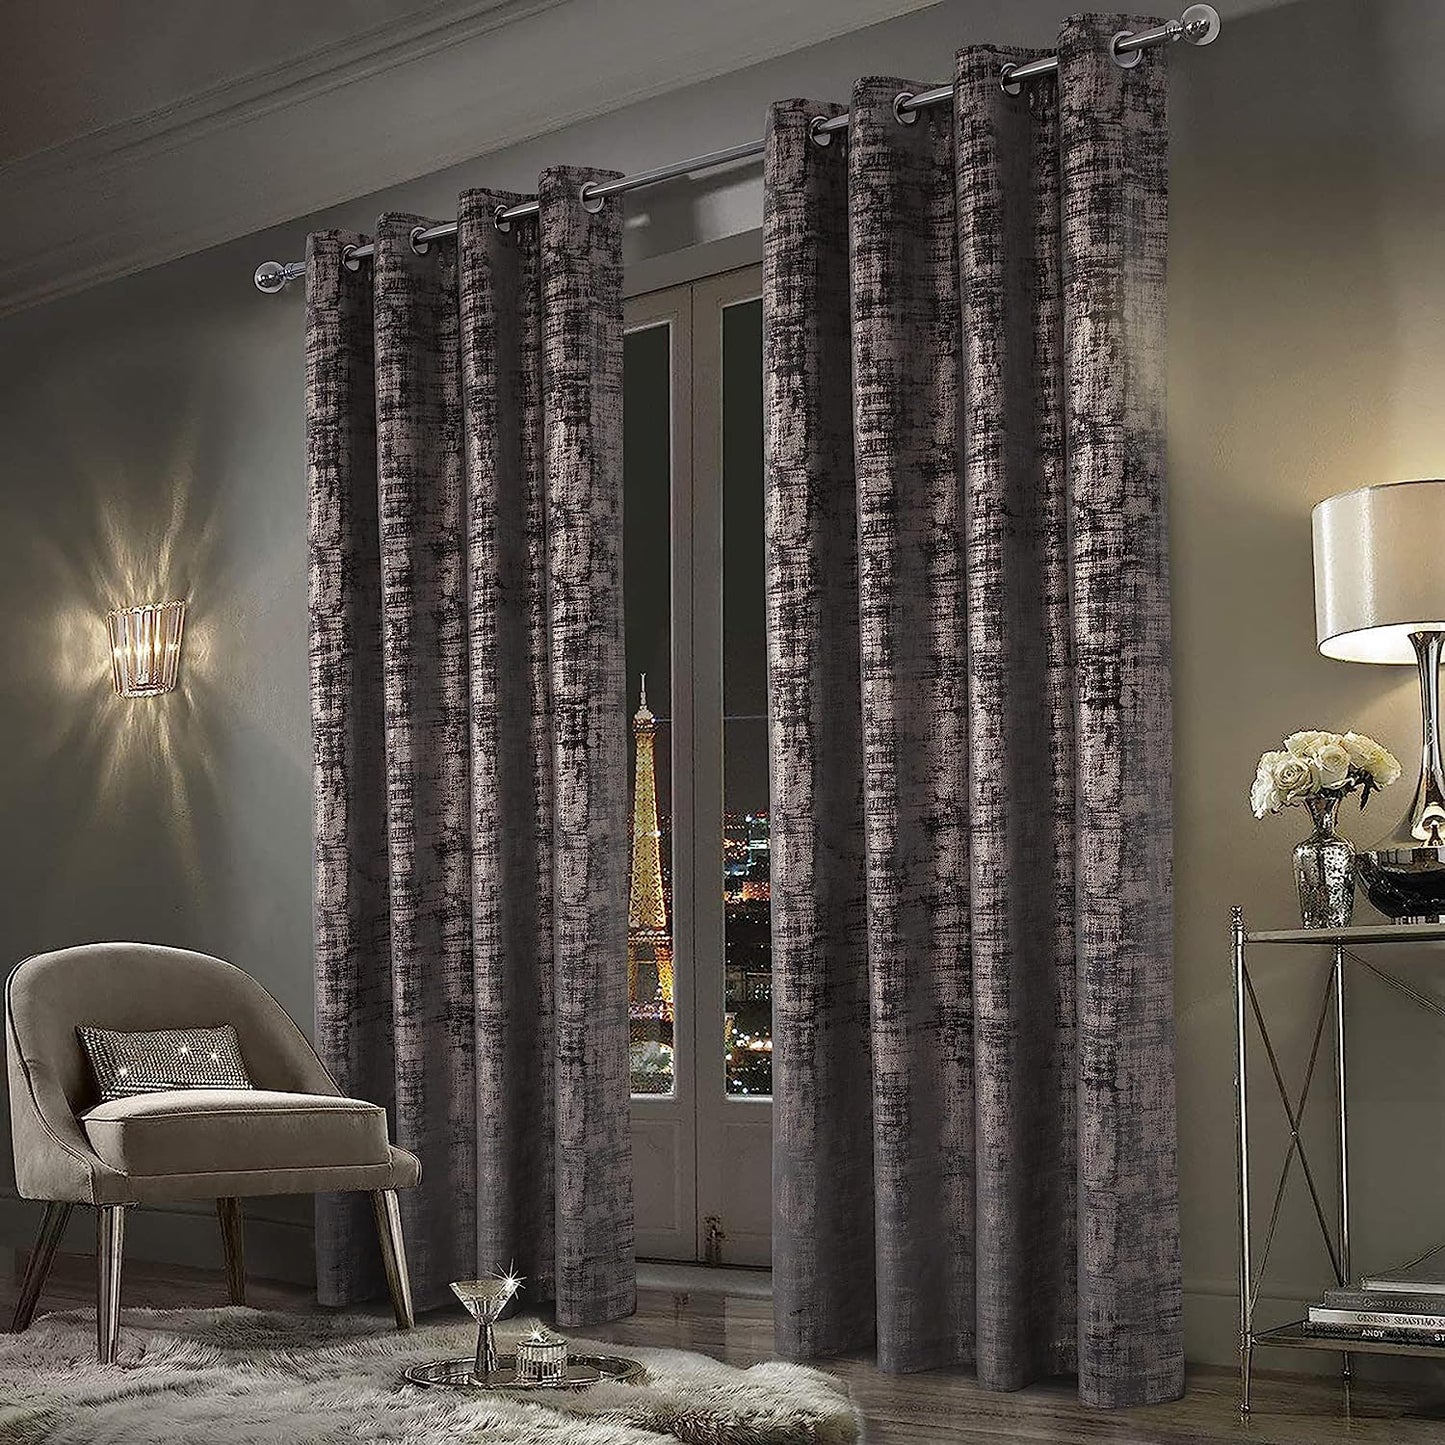 Always4U Soft Velvet Curtains 95 Inch Length Luxury Bedroom Curtains Gold Foil Print Window Curtains for Living Room 1 Panel White  always4u Charcoal Grey (Gold Print) 2 Panels: 52''W*95''L 